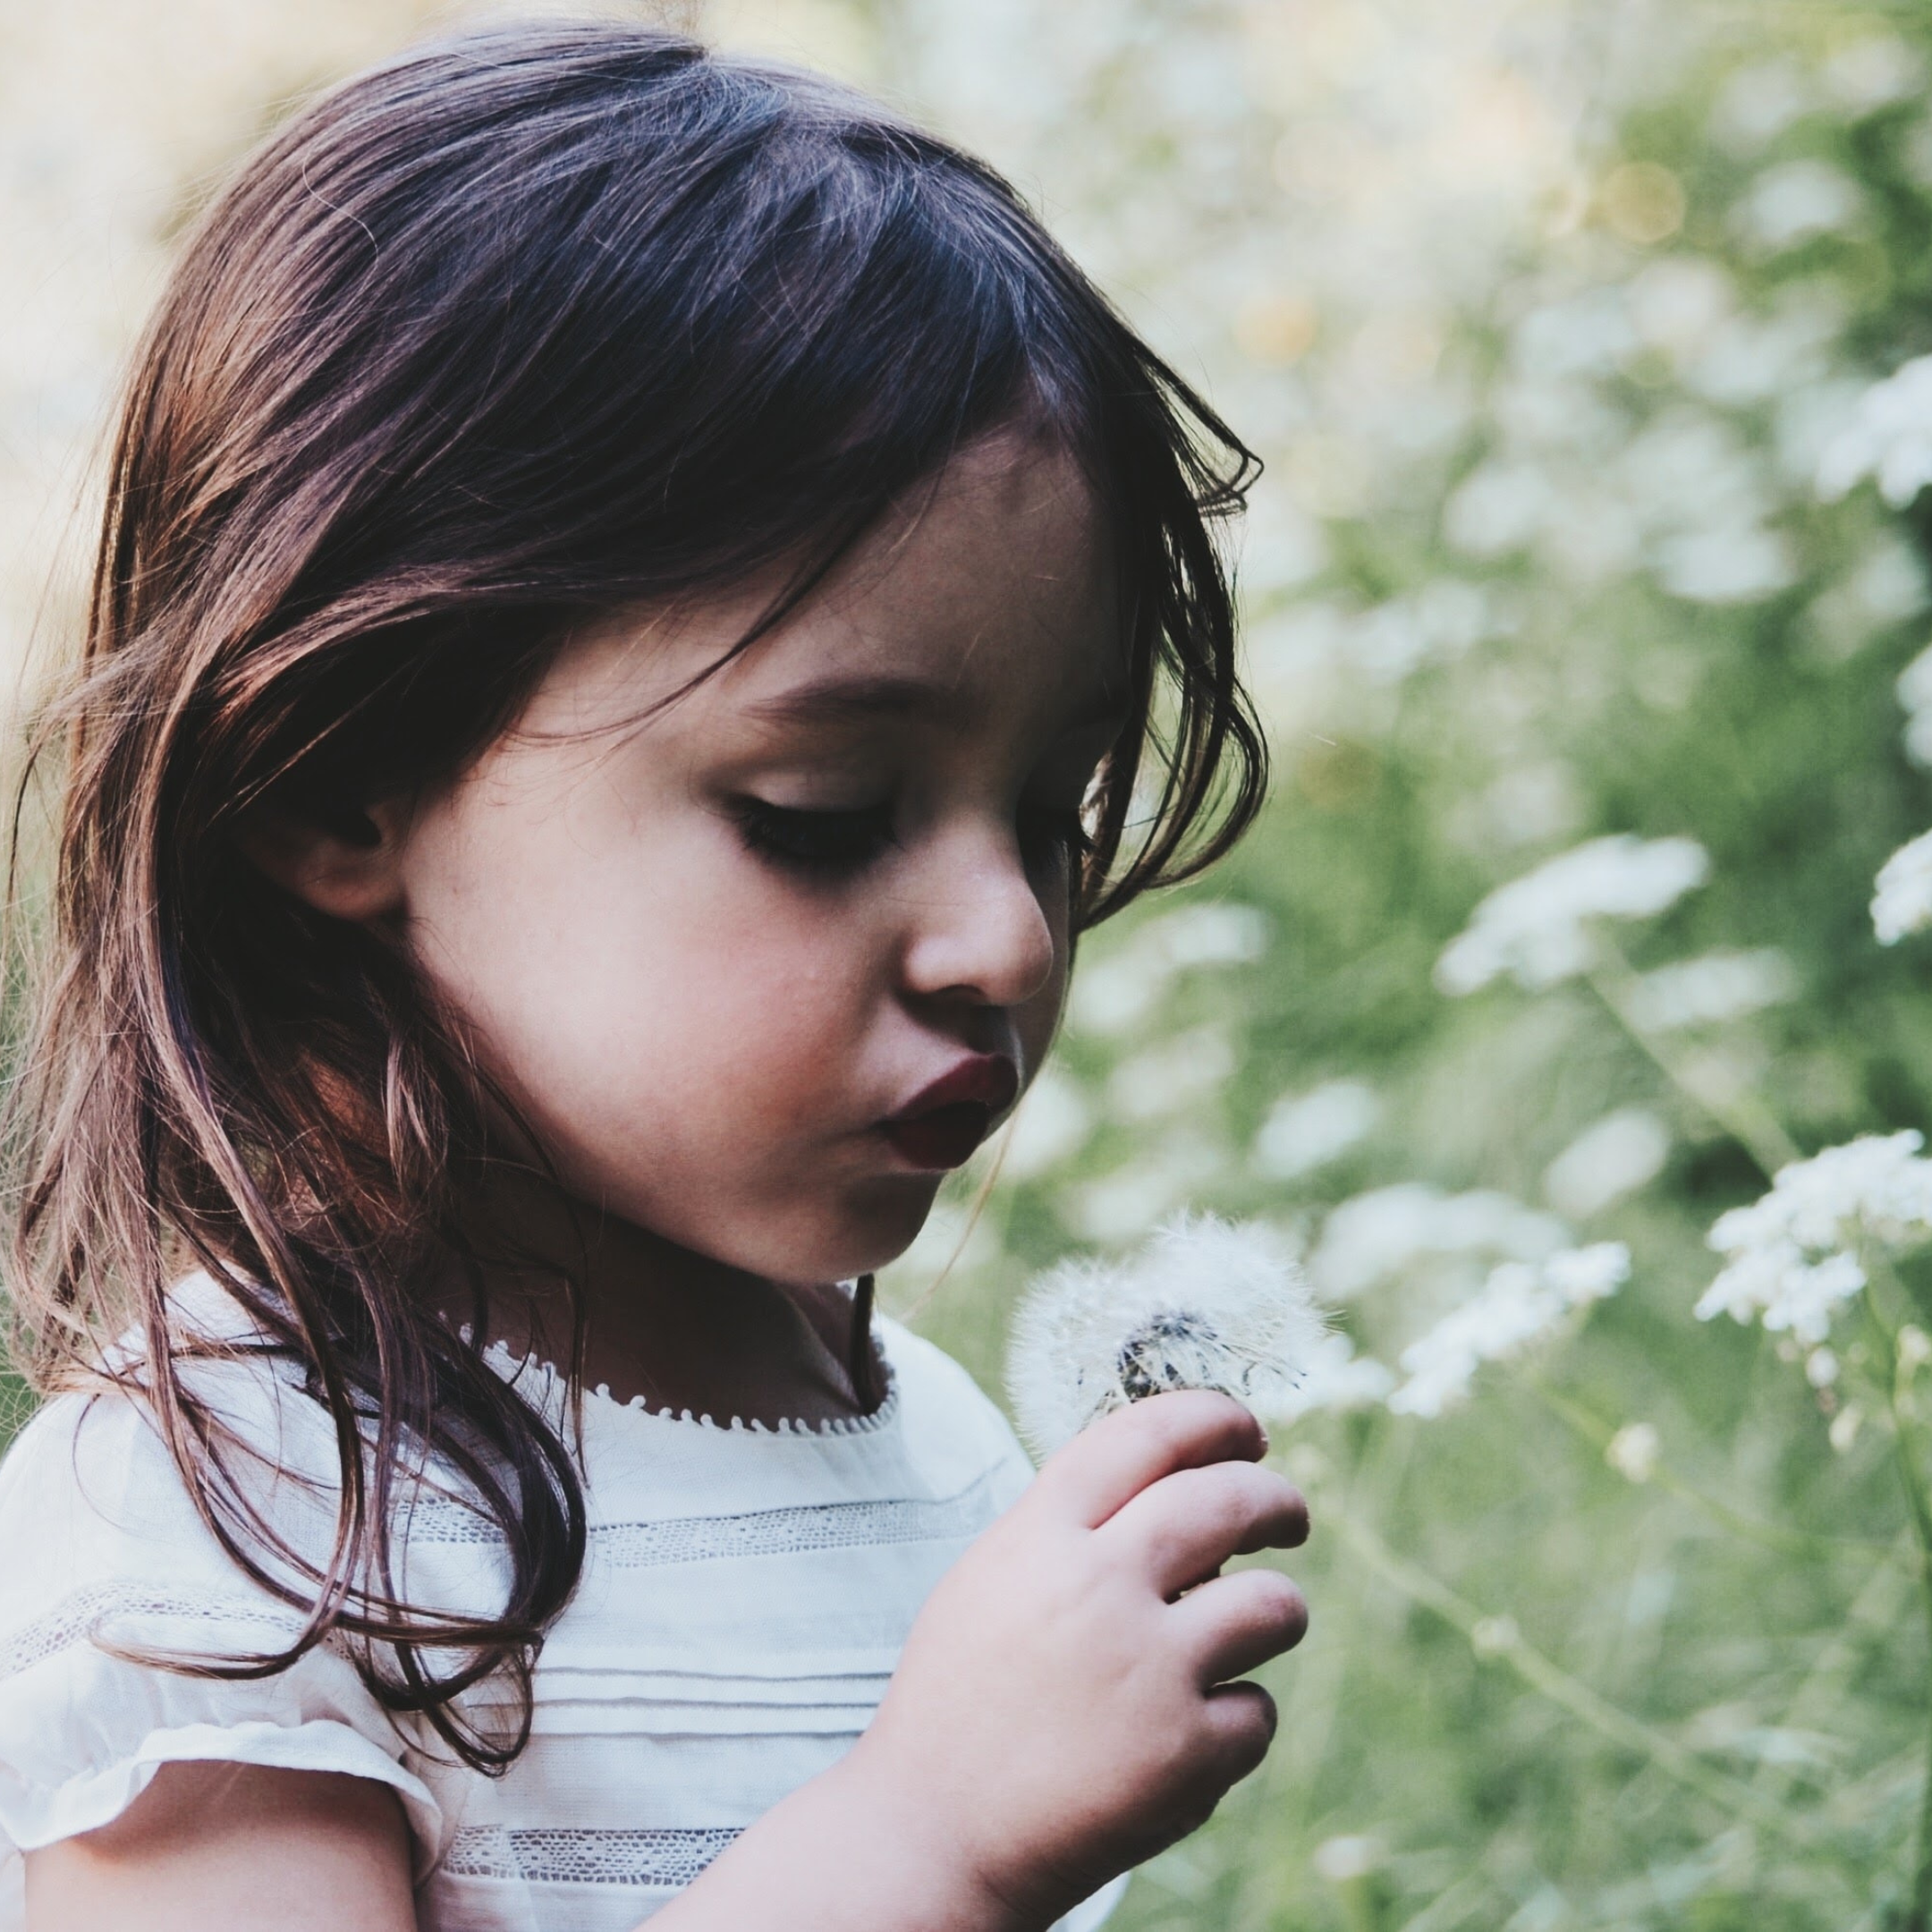 Coping with childhood hay fever